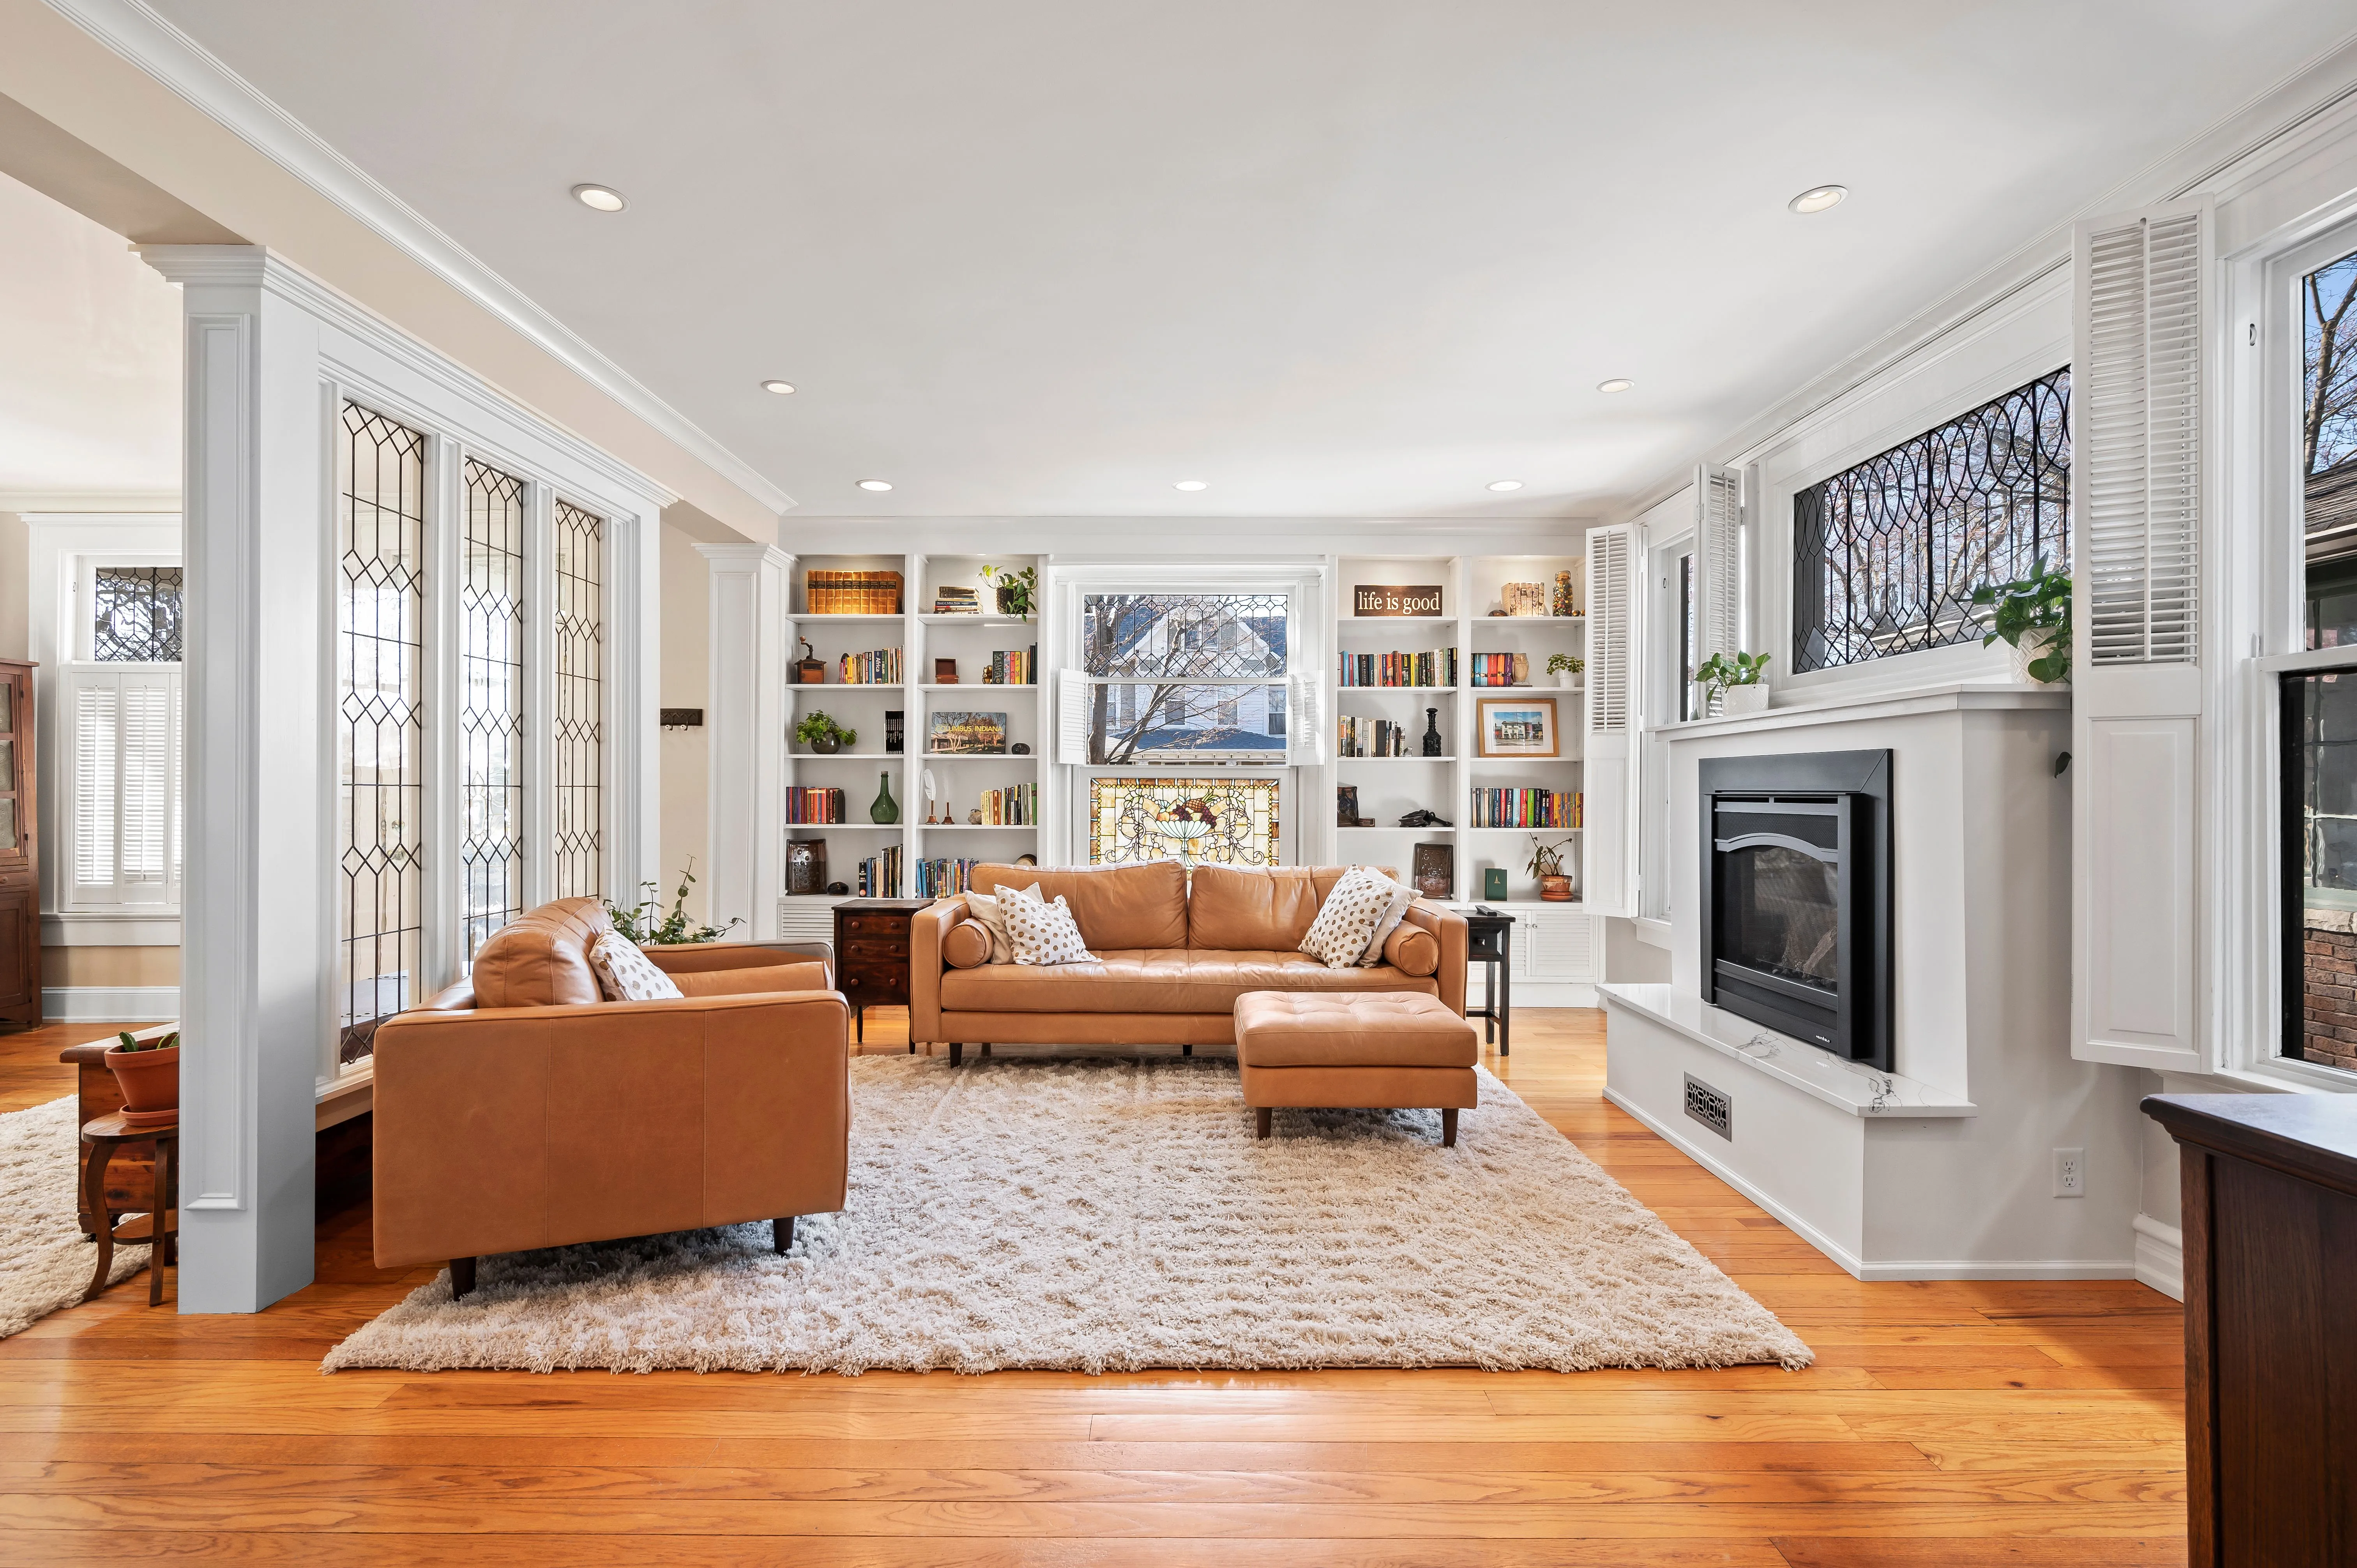 Elegant living room interior with hardwood floors, leather sofas, fireplace, and built-in shelving.